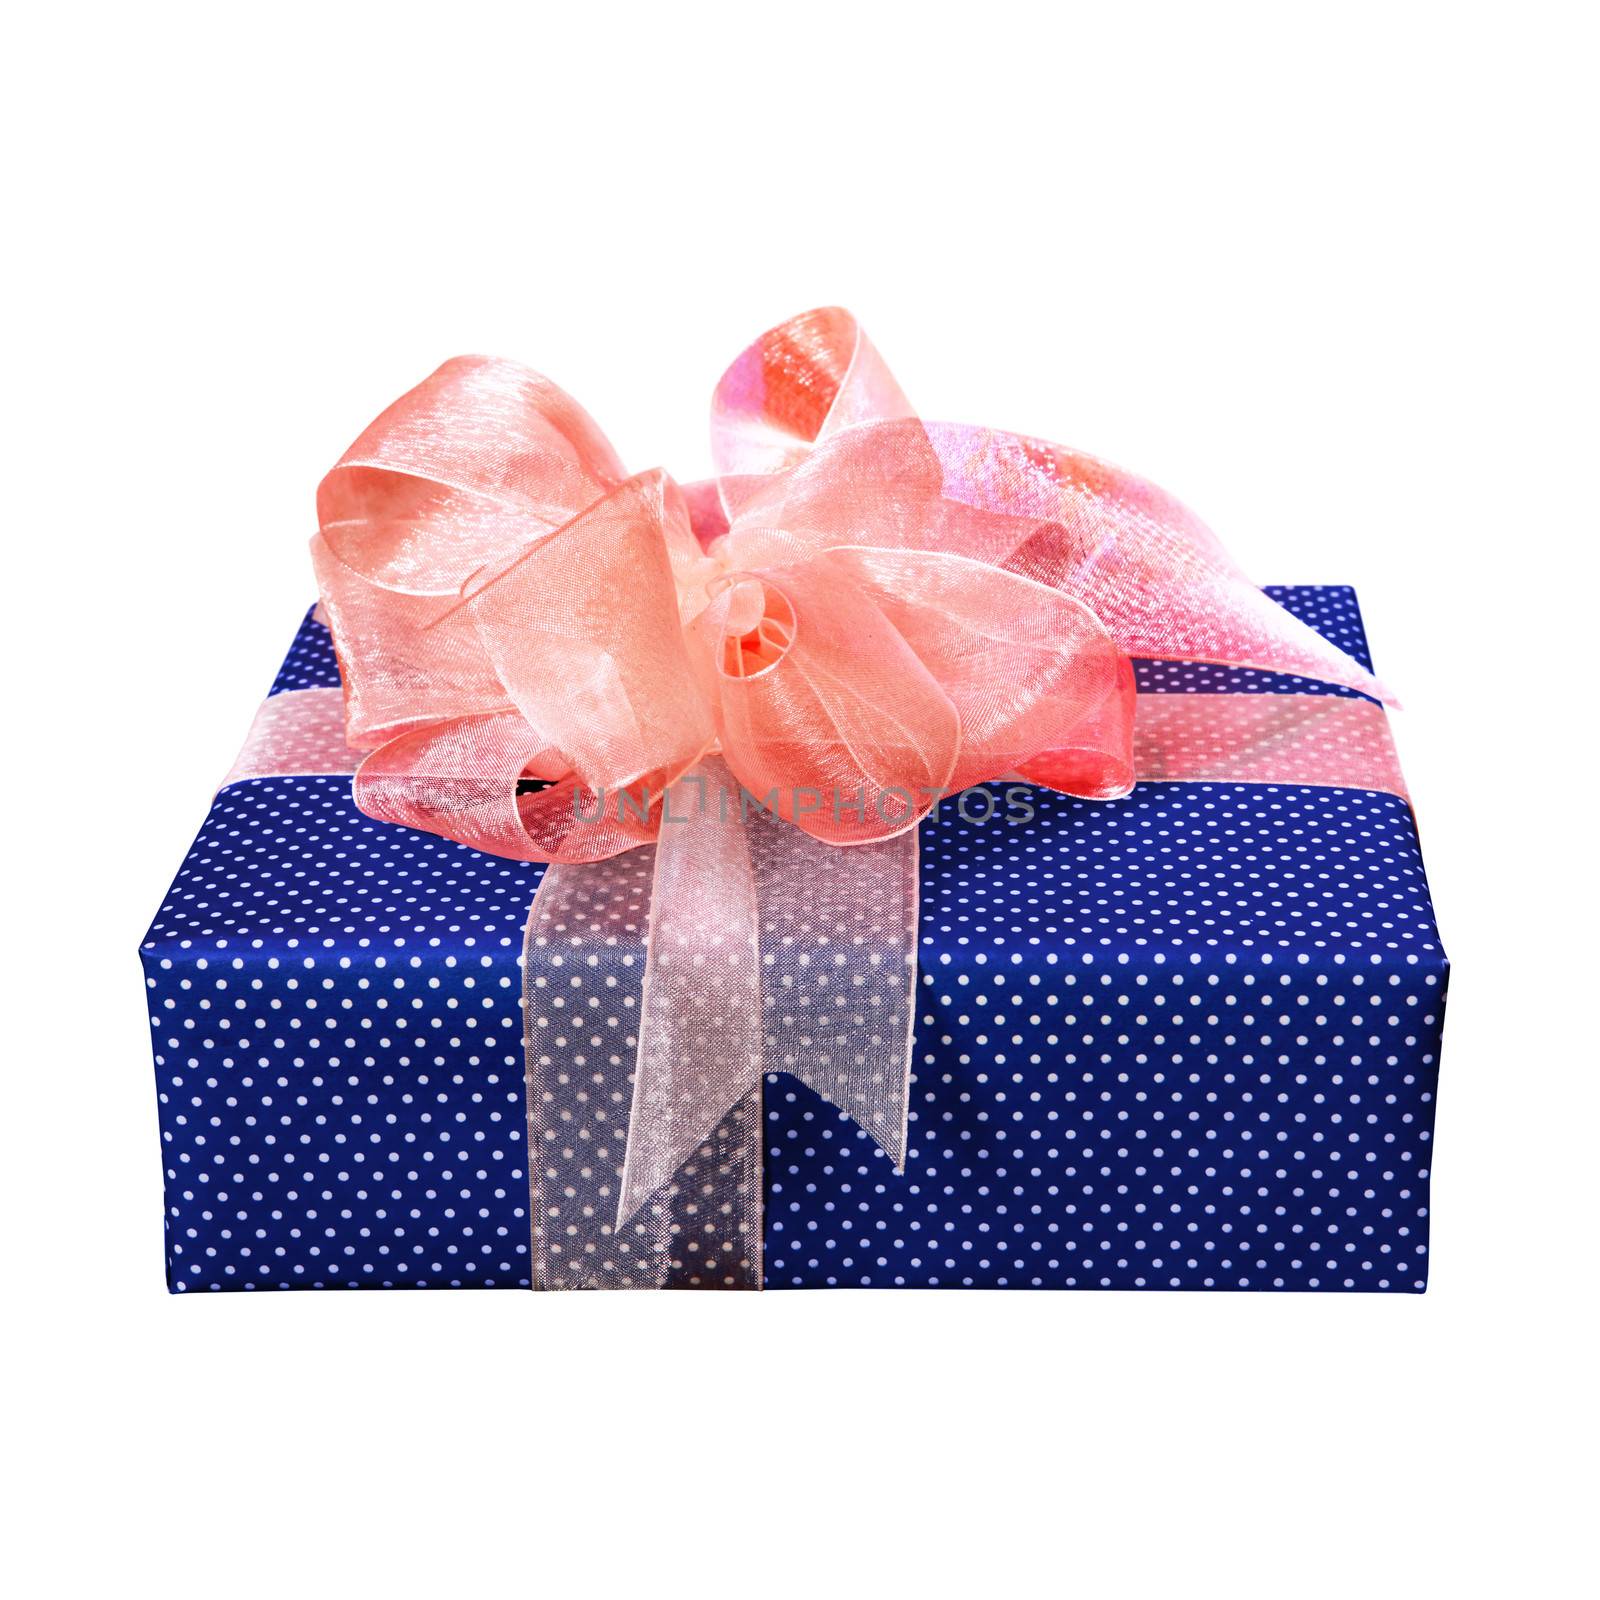 blue gift box by ssuaphoto